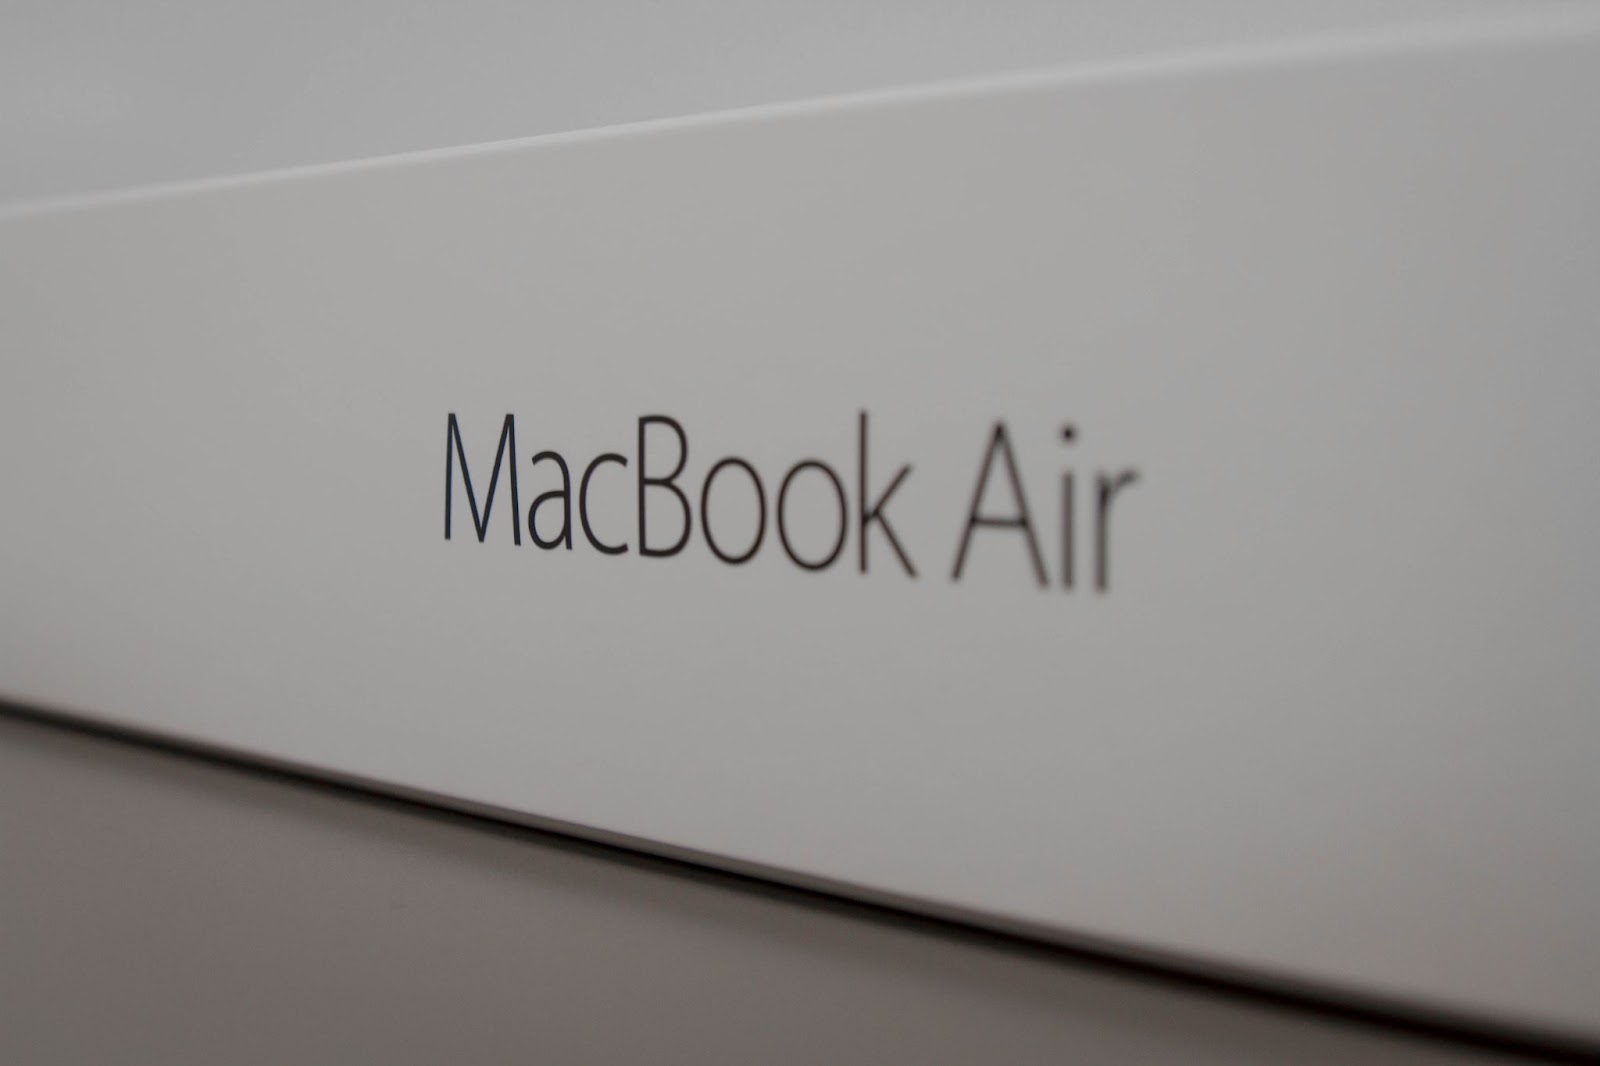 15-inch MacBook Air: release date and what we know